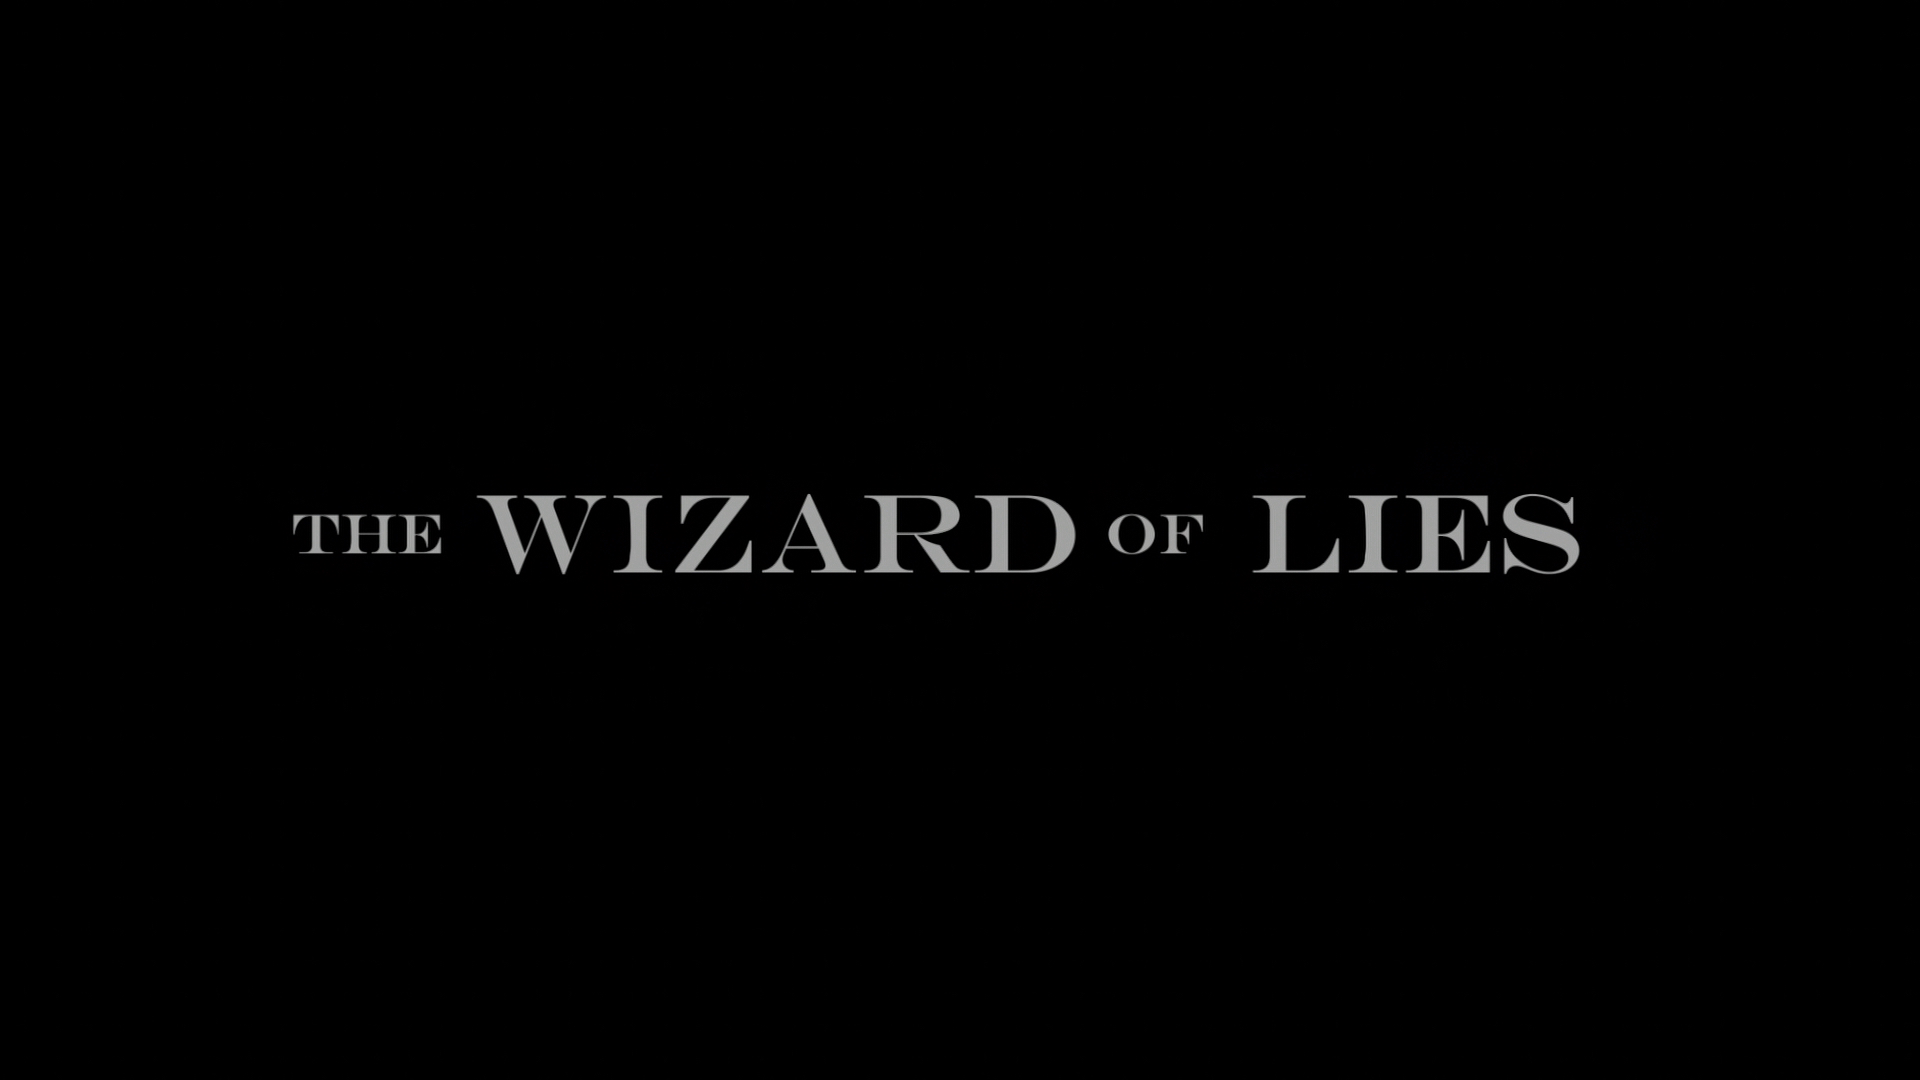 The Wizard of Lies (Blu-ray) : DVD Talk Review of the Blu-ray1920 x 1080